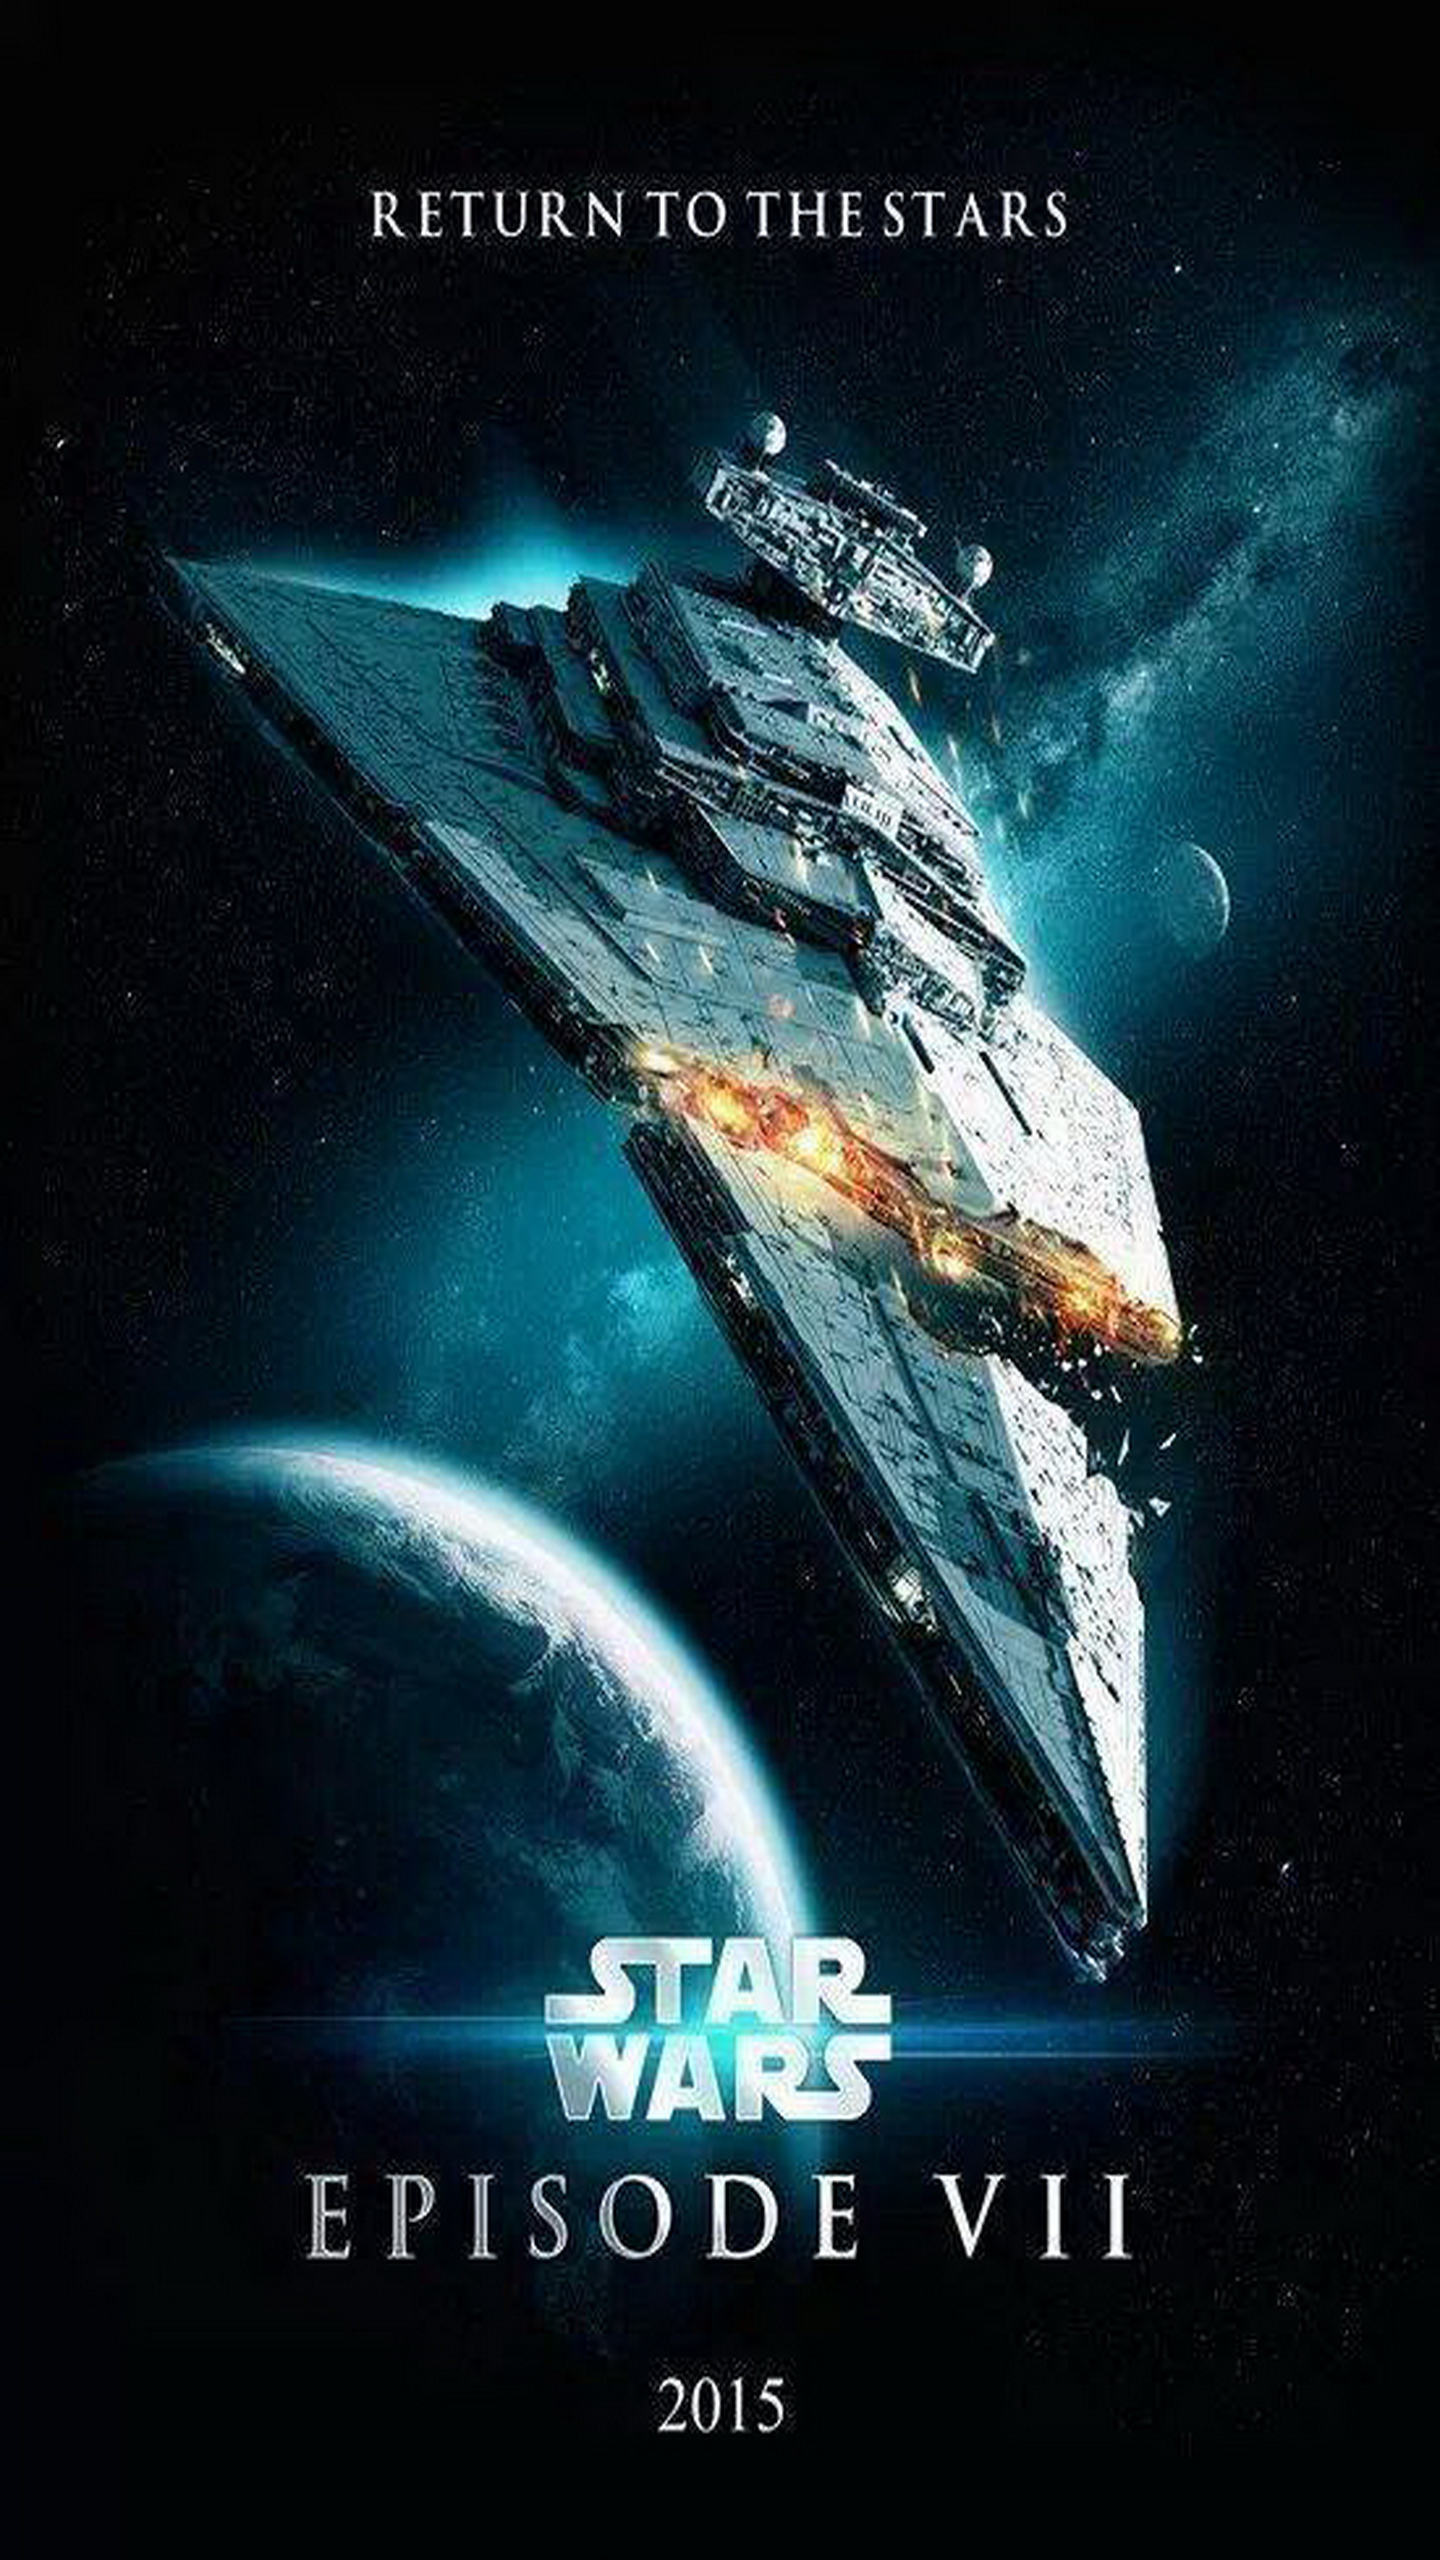  VII The Force Awakens 2015 Poster Galaxy Note Wallpaper 3